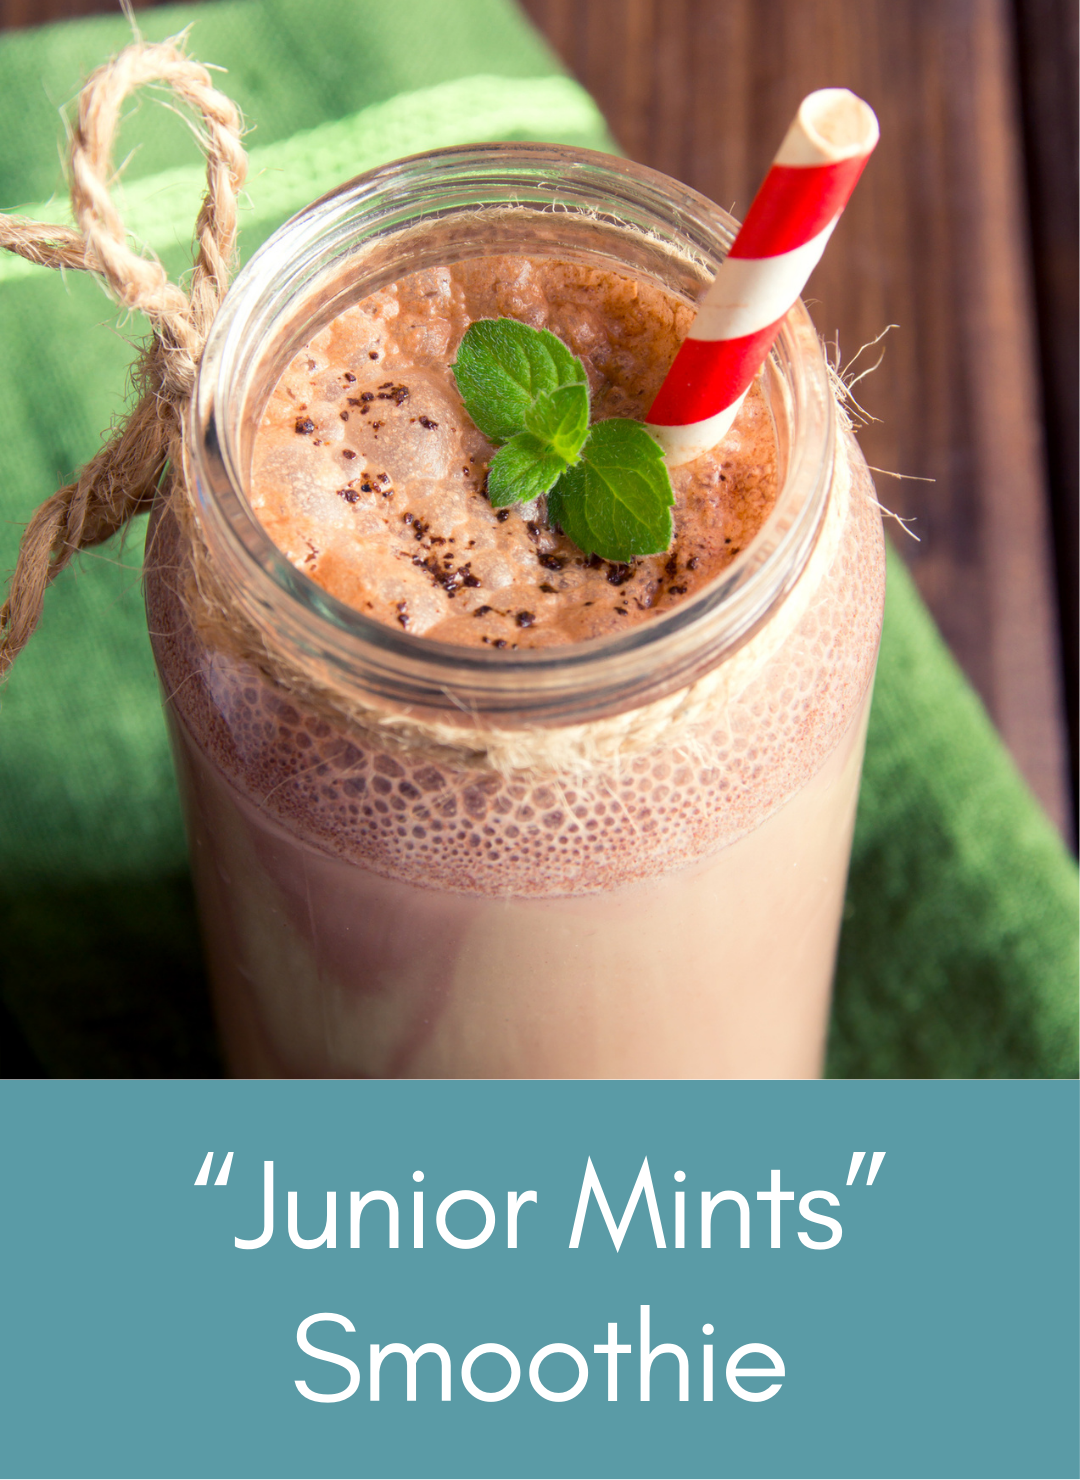 Chocolate mint smoothie evoking the taste of 